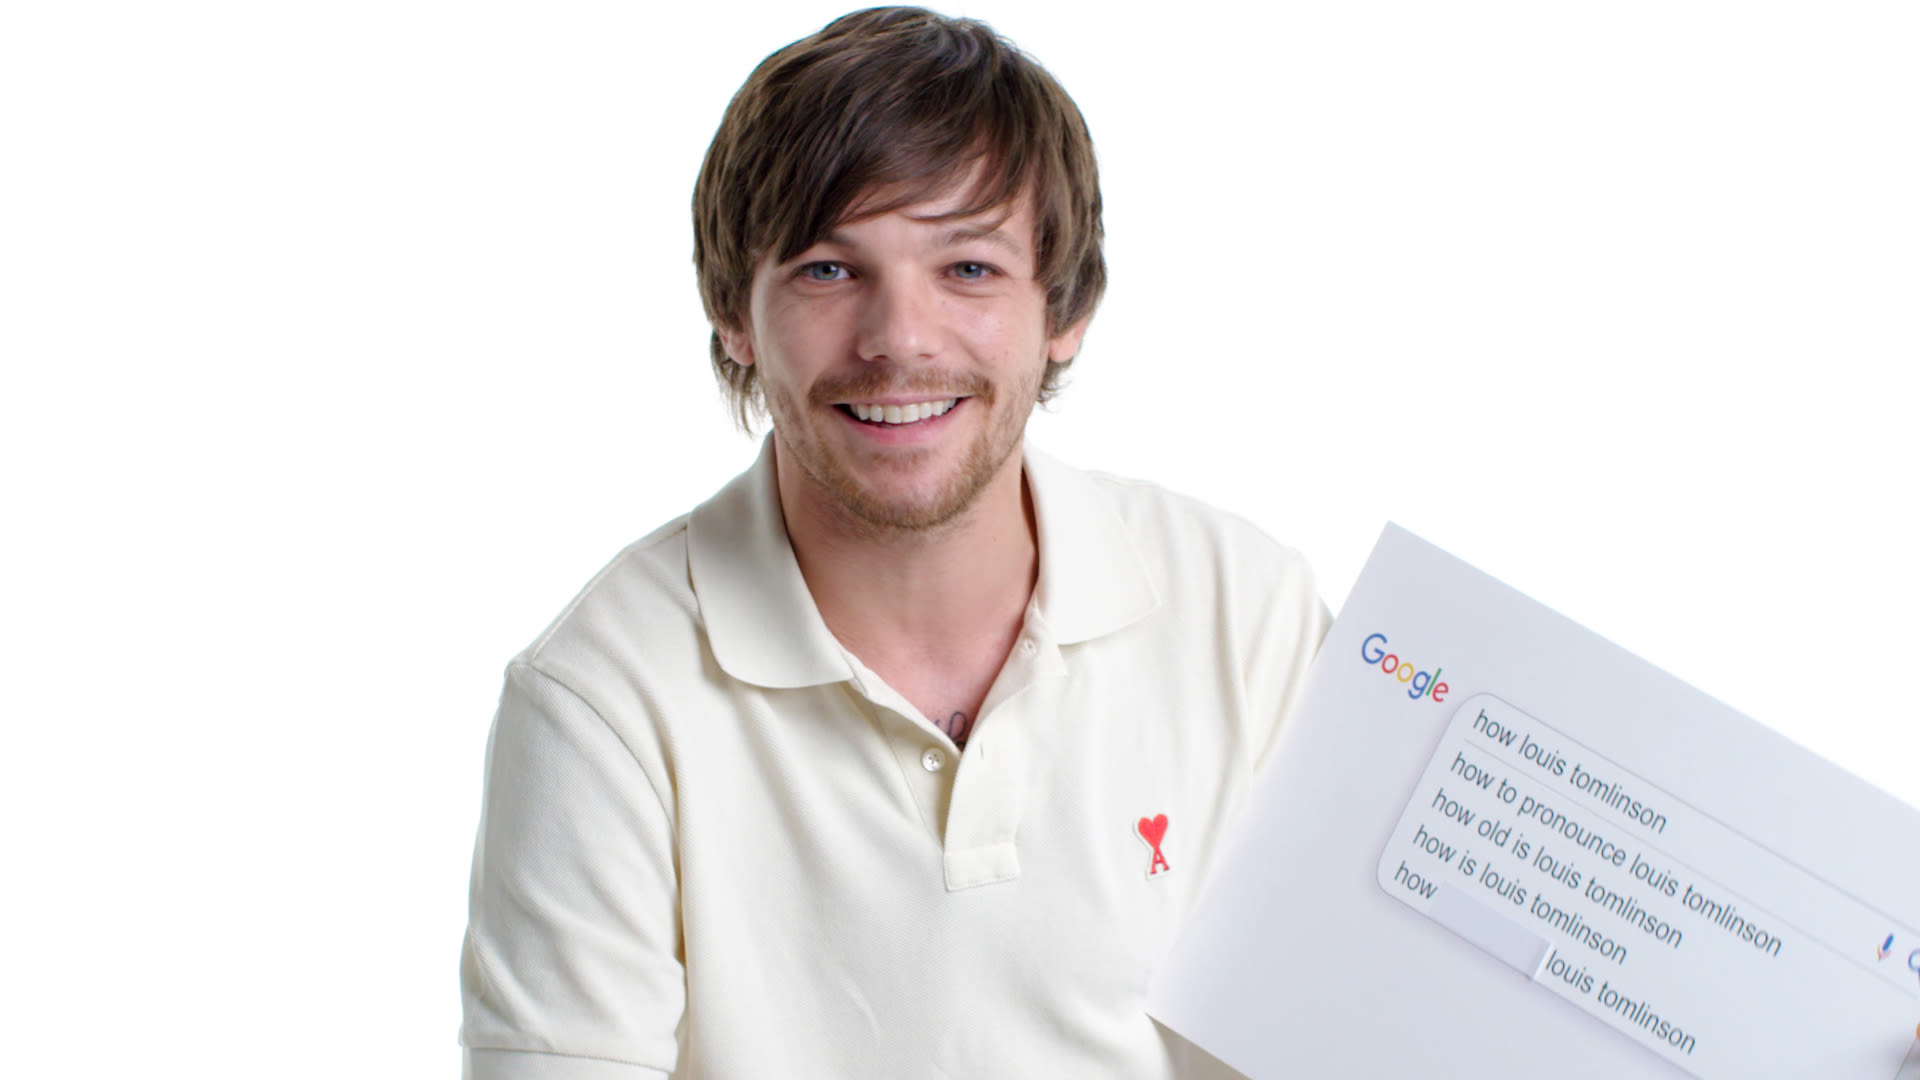 Watch Louis Tomlinson Answers the Web's Most Searched Questions, Autocomplete Interview